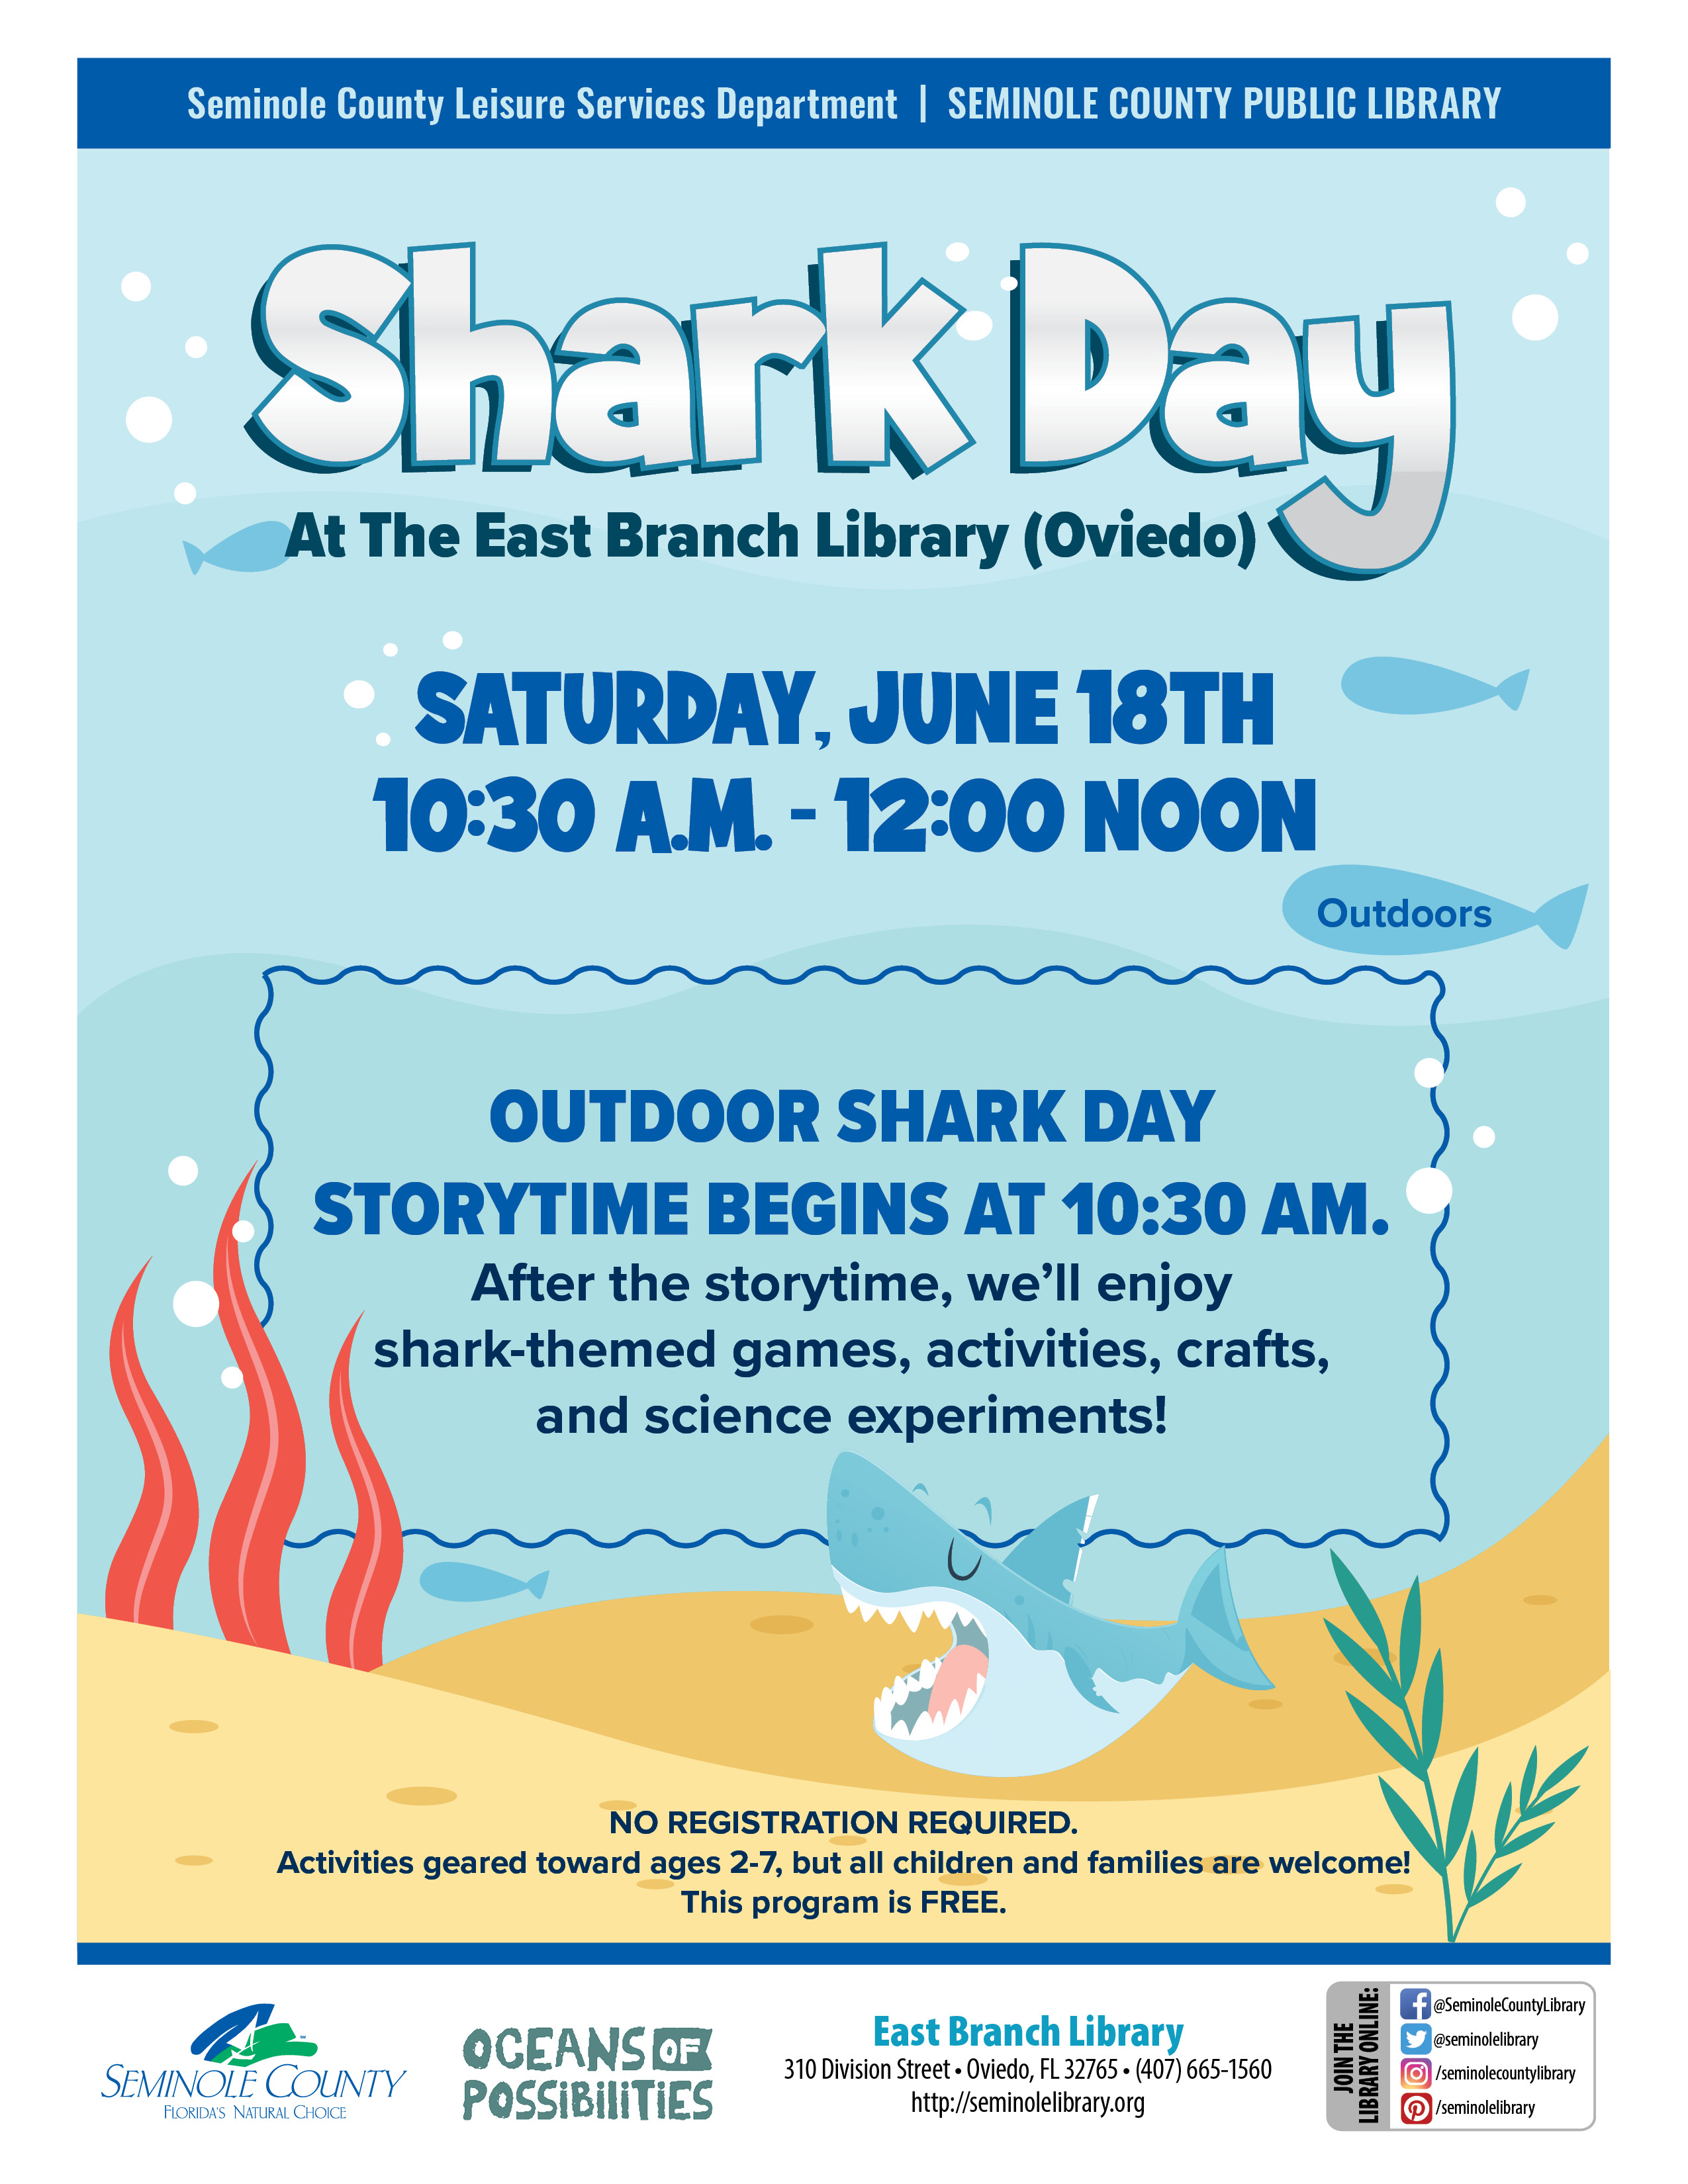 Shark Day at East Branch Library